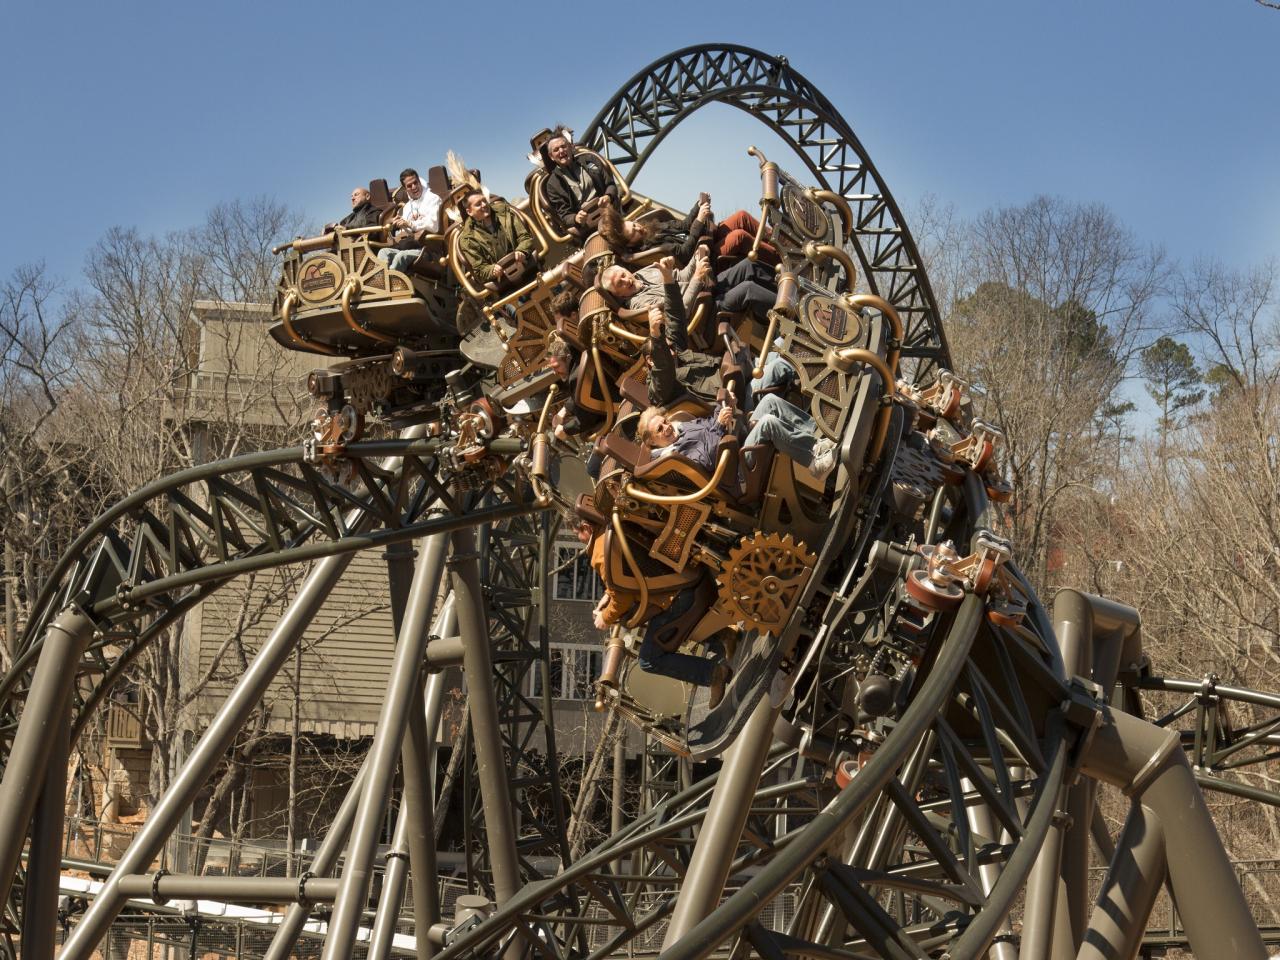 10 New Theme Park Rides That Will Blow Your Mind